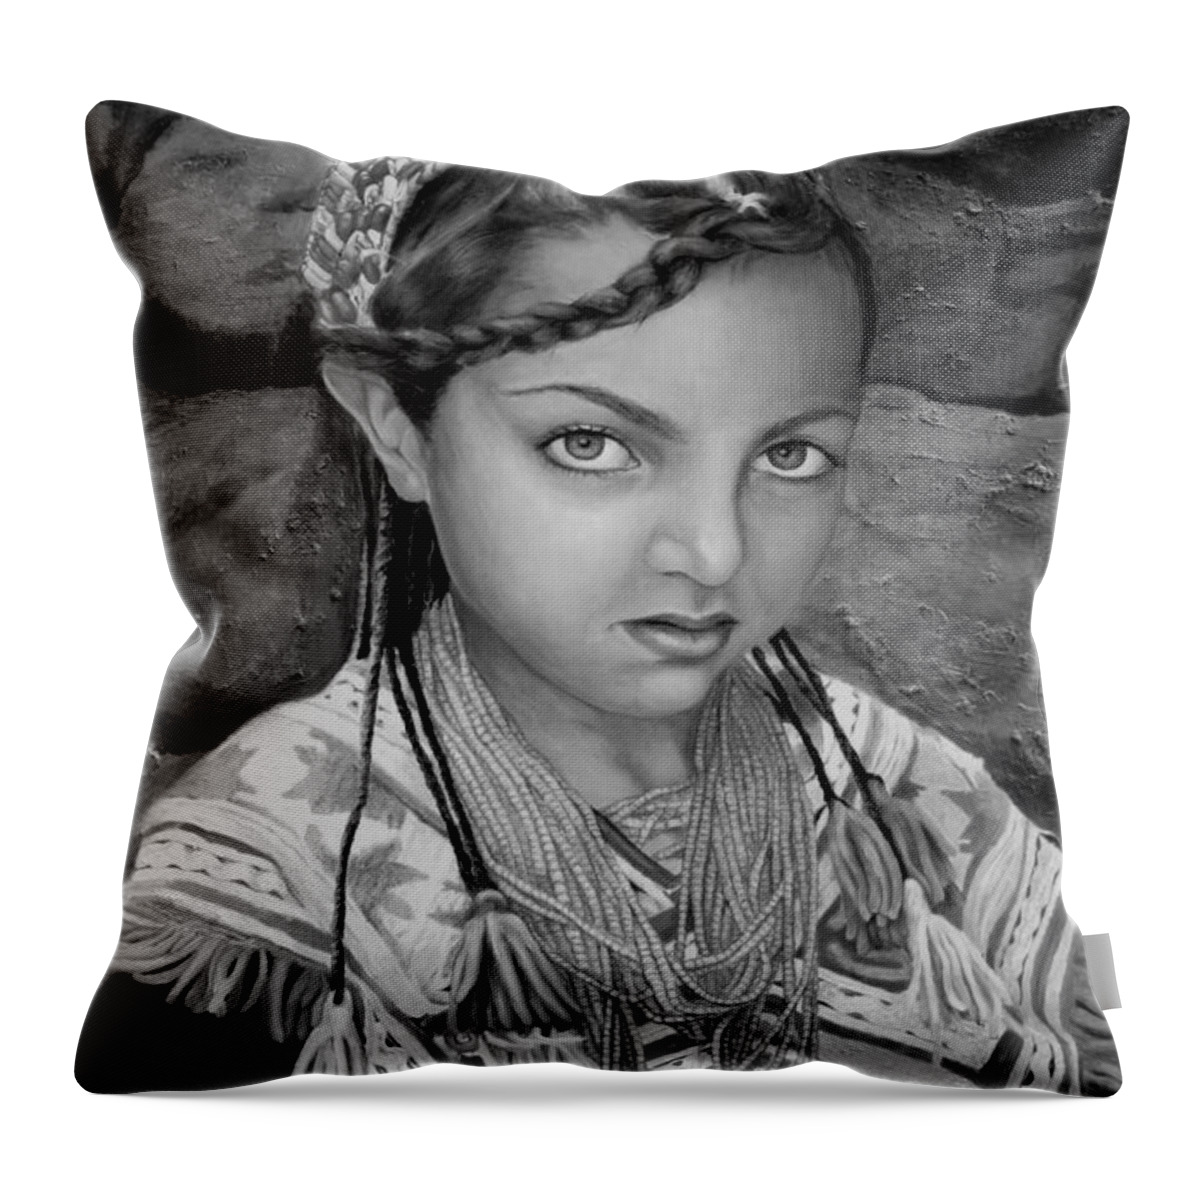 People Portraits Throw Pillow featuring the painting Pakistani Girl by Portraits By NC